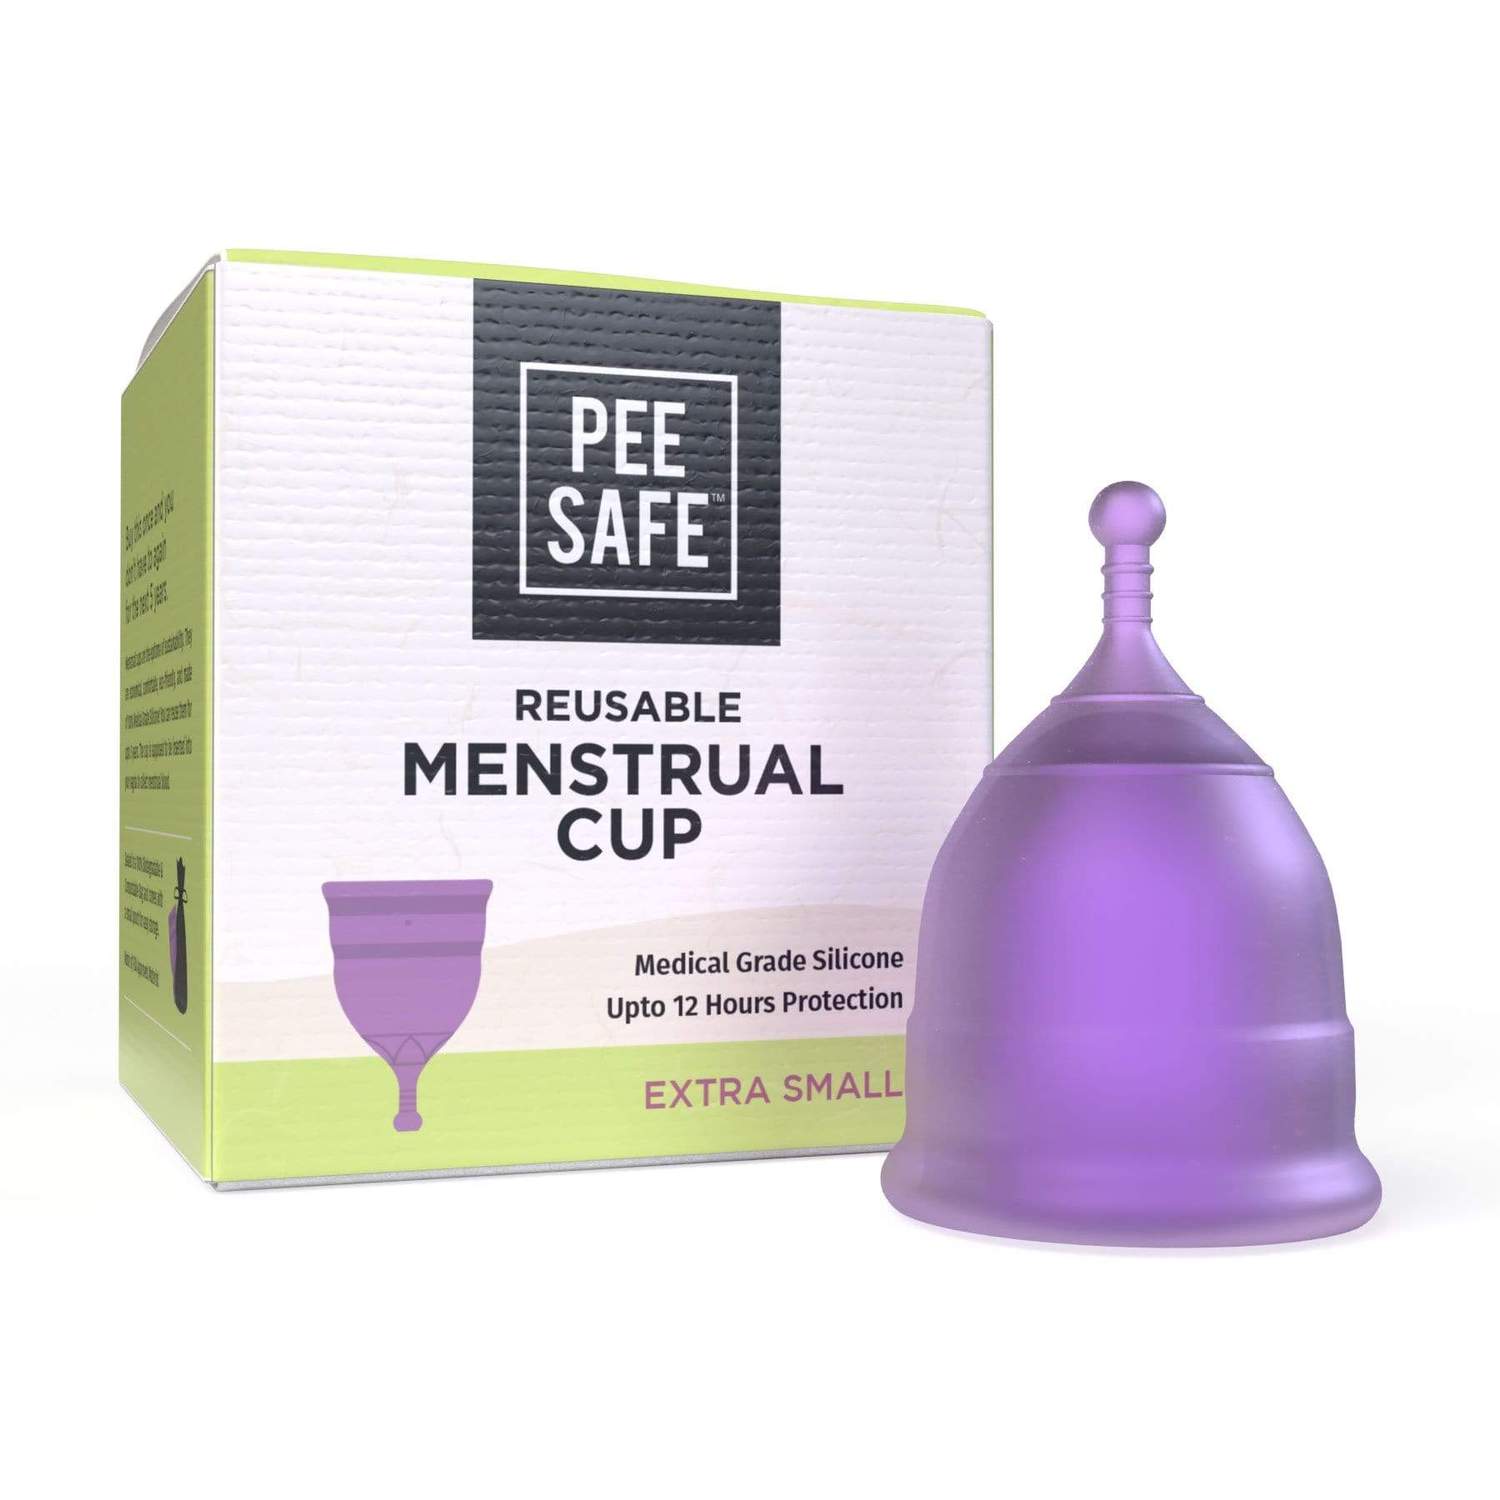 Pee Safe Reusable Menstrual Cup With Medical Grade Silcone For Women - Extra Small 